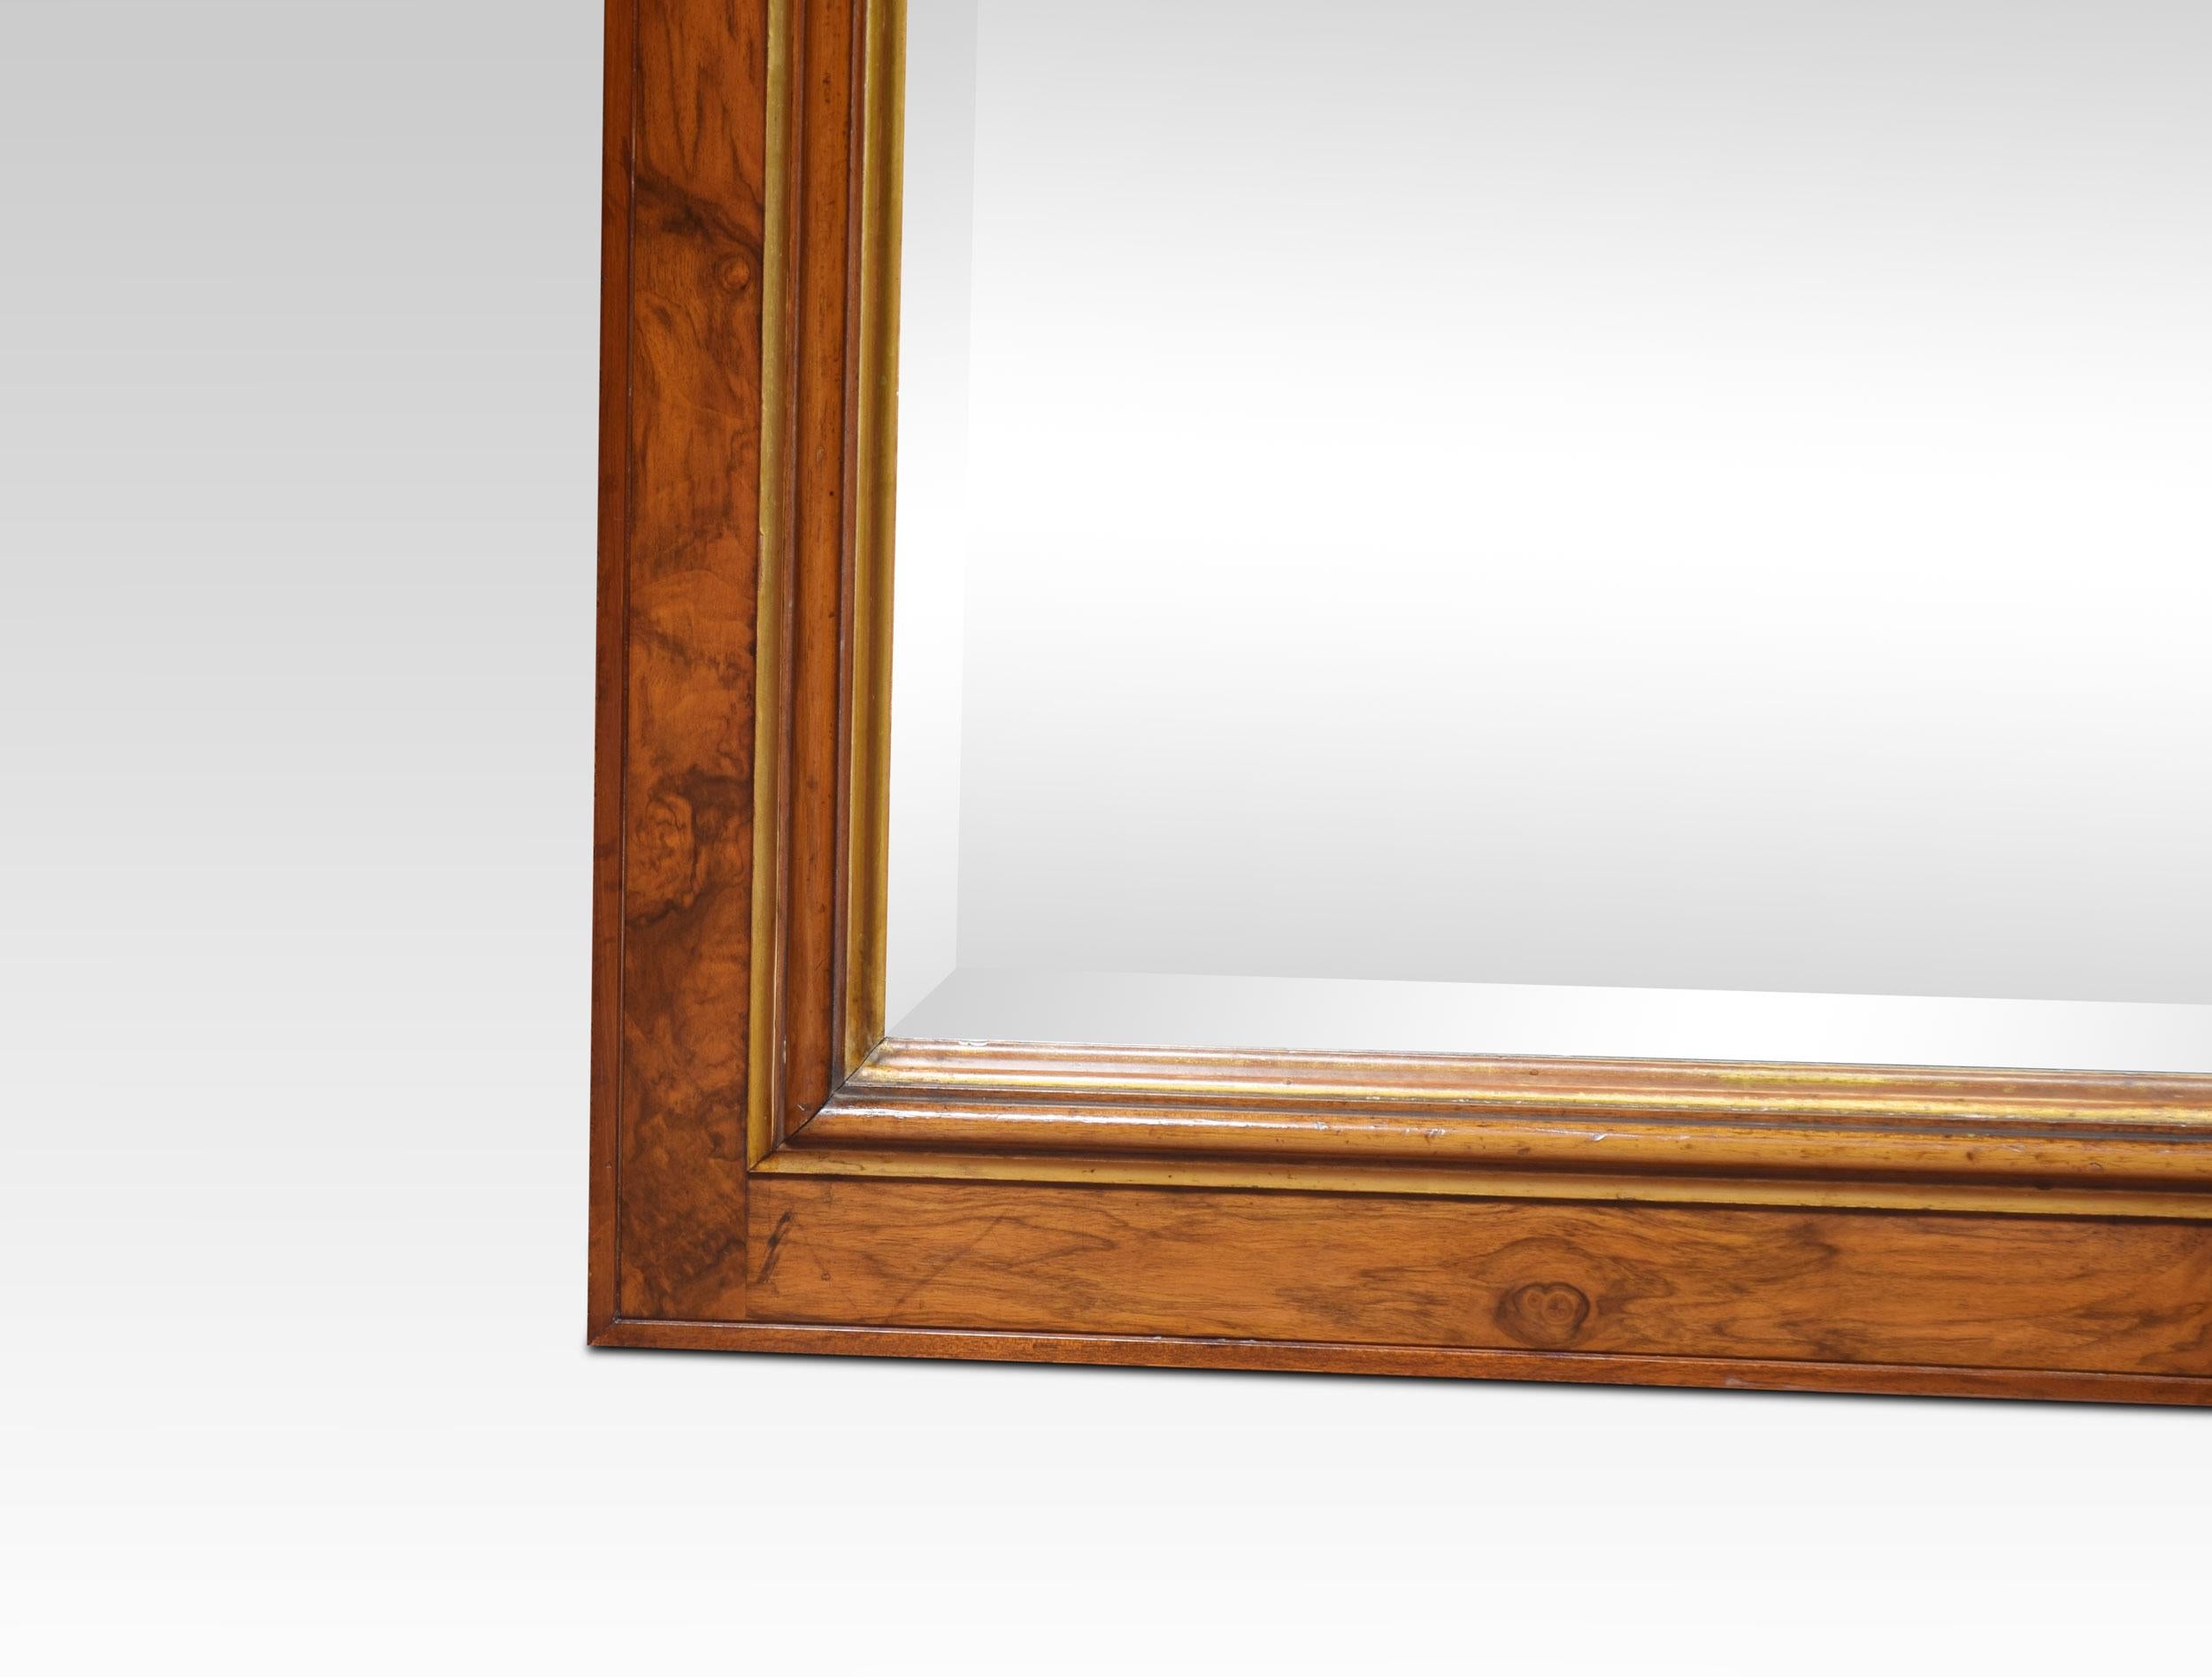 19th century walnut wall mirror the large rectangular bevel mirror encased in walnut frame. The mirror can be either landscape or portrait.
Dimensions
Height 72 Inches
Width 38.5 Inches
Depth 2 Inches.